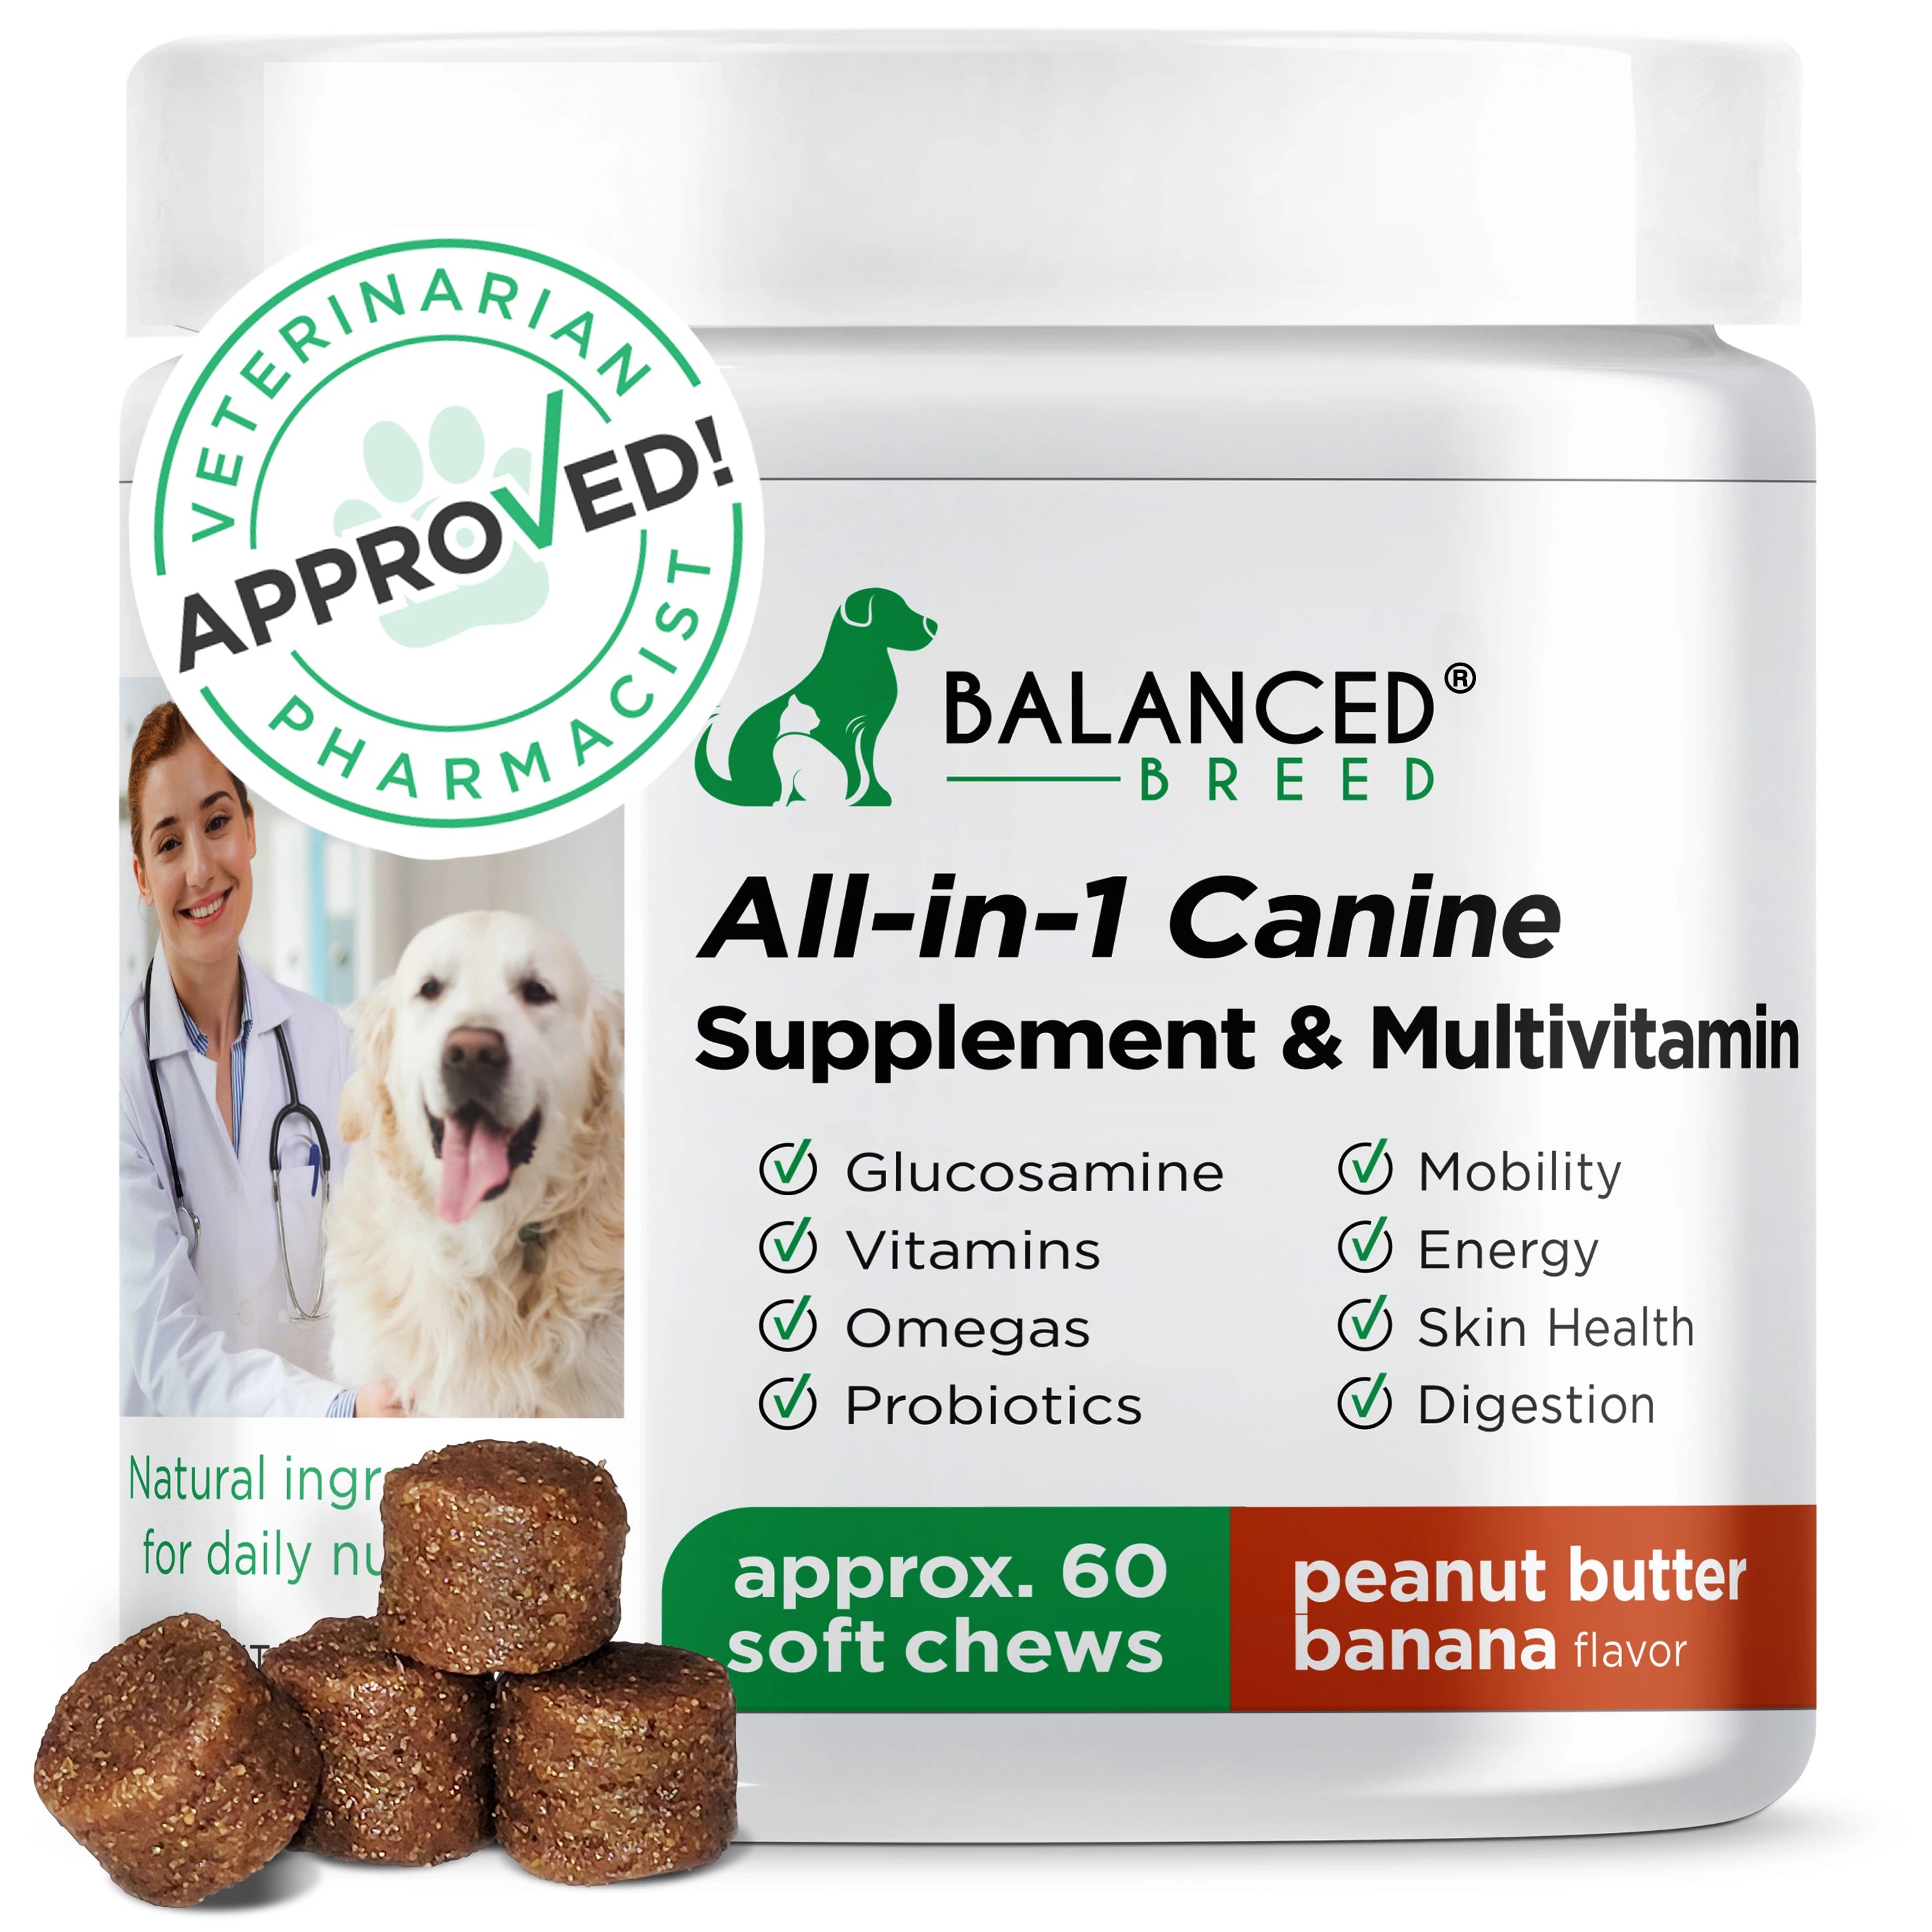 Balanced Breed® All-in-1 Canine Multivitamin (1,2,3 packs)